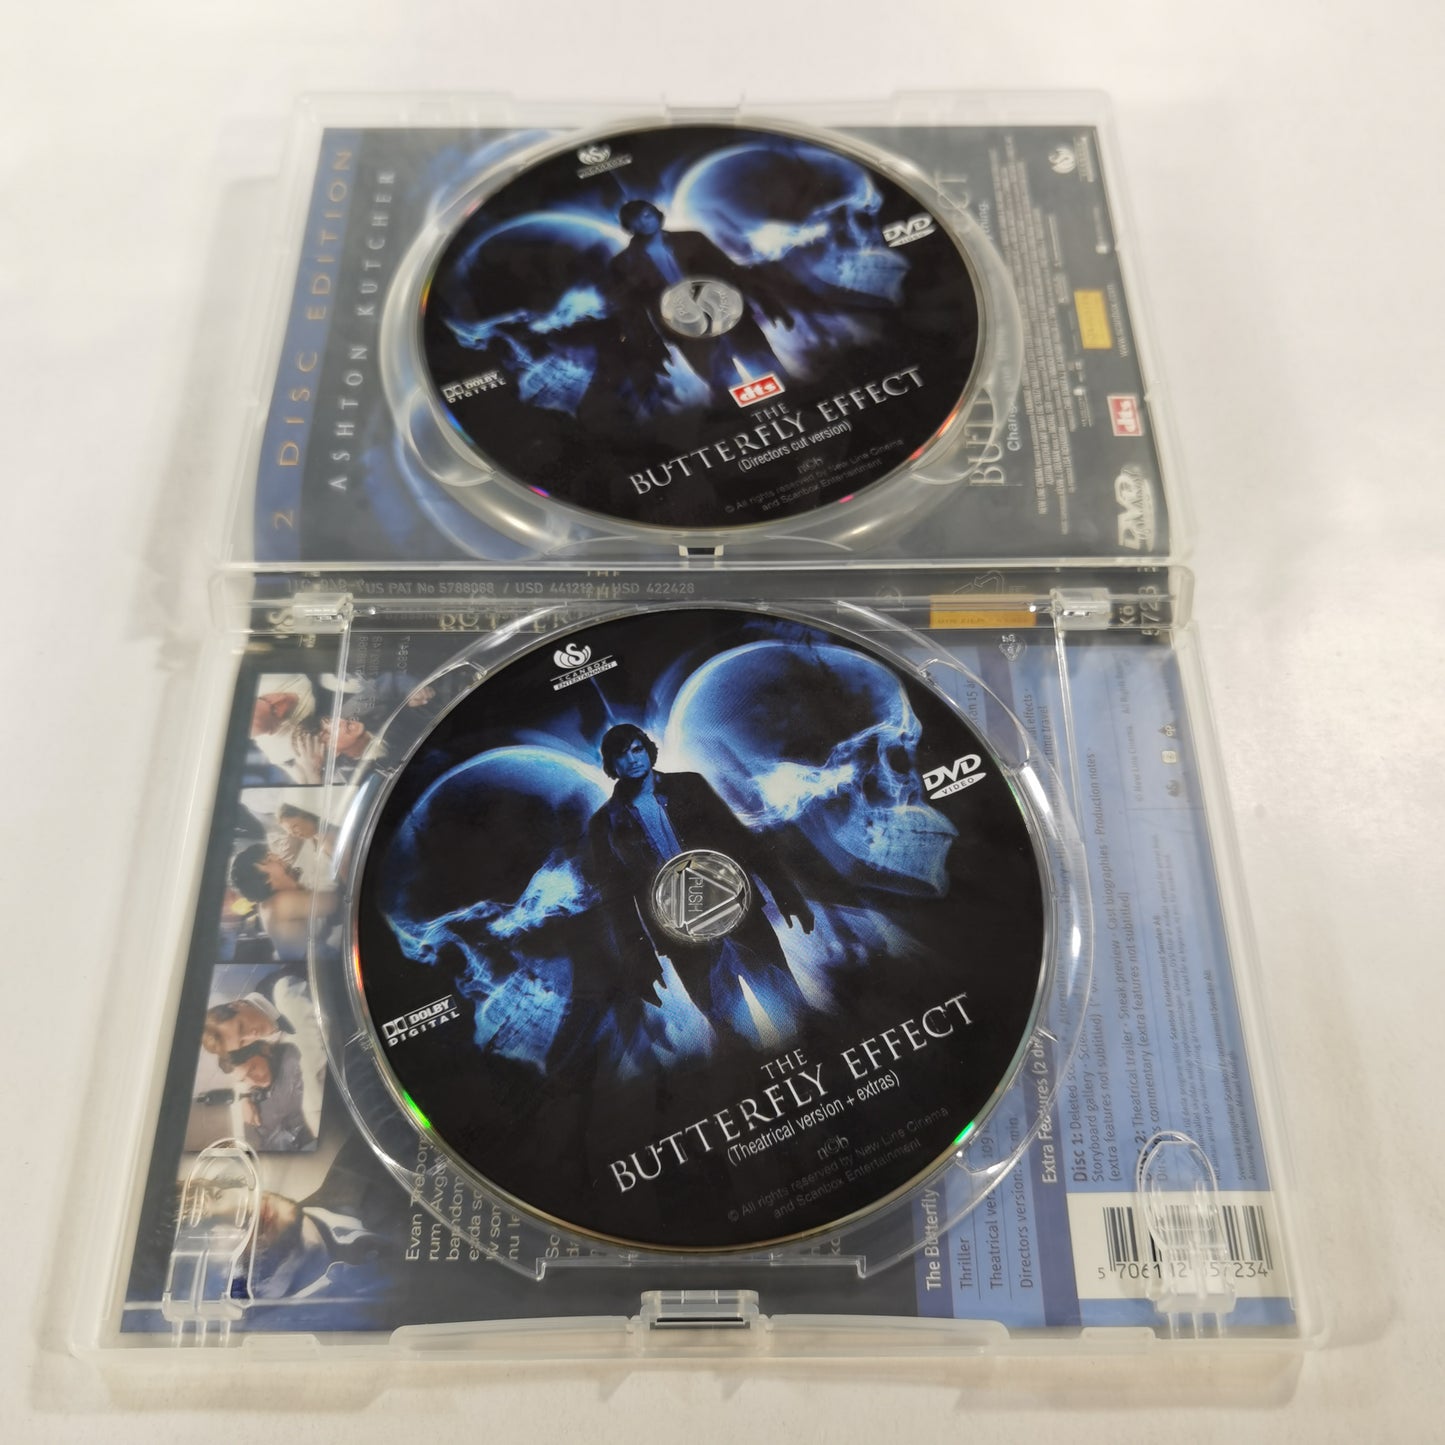 The Butterfly Effect (2004) - DVD SE 2-Disc Edition